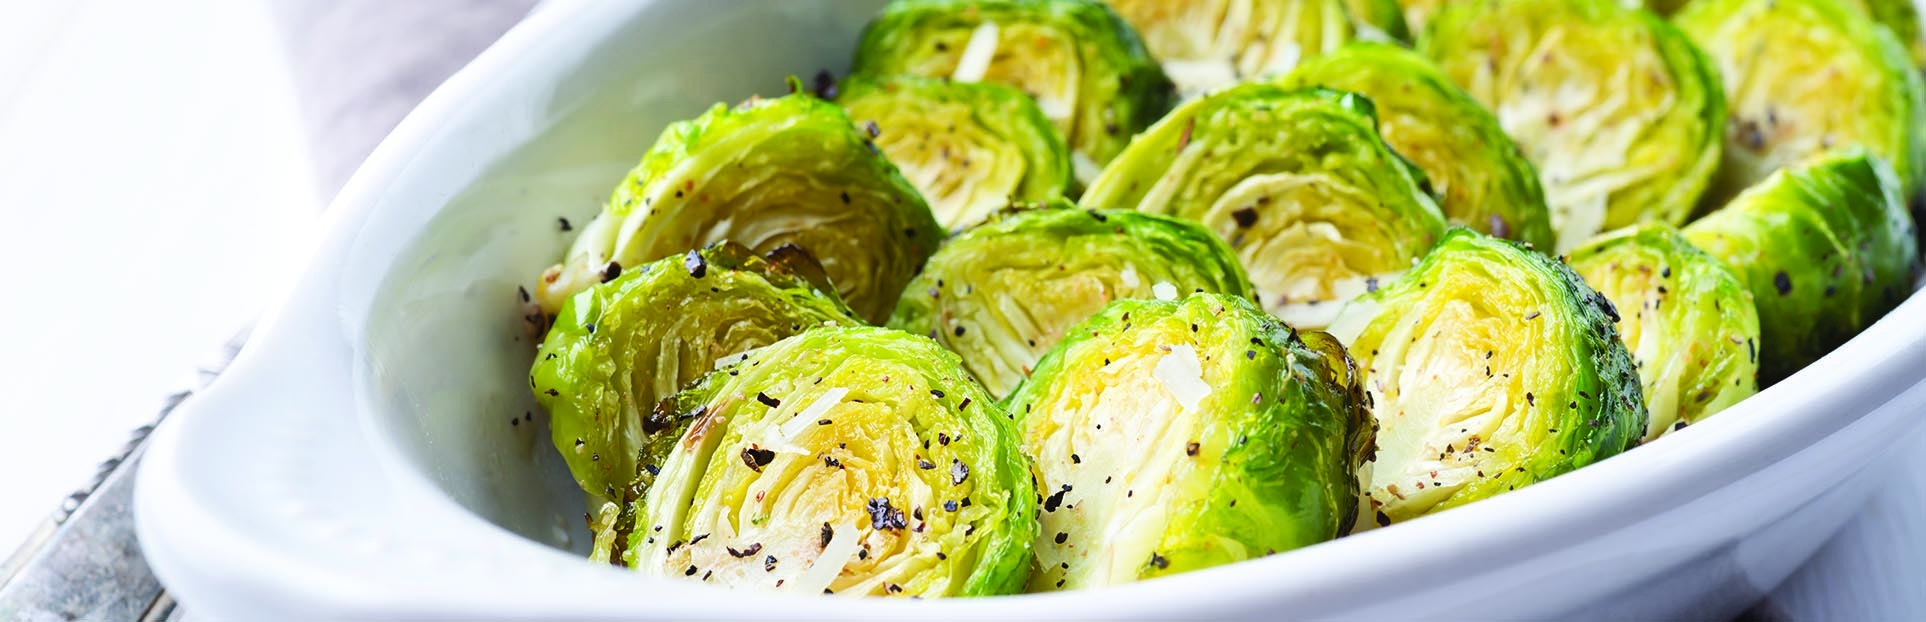 Creamy Parmesan Brussels Sprouts Recipe 